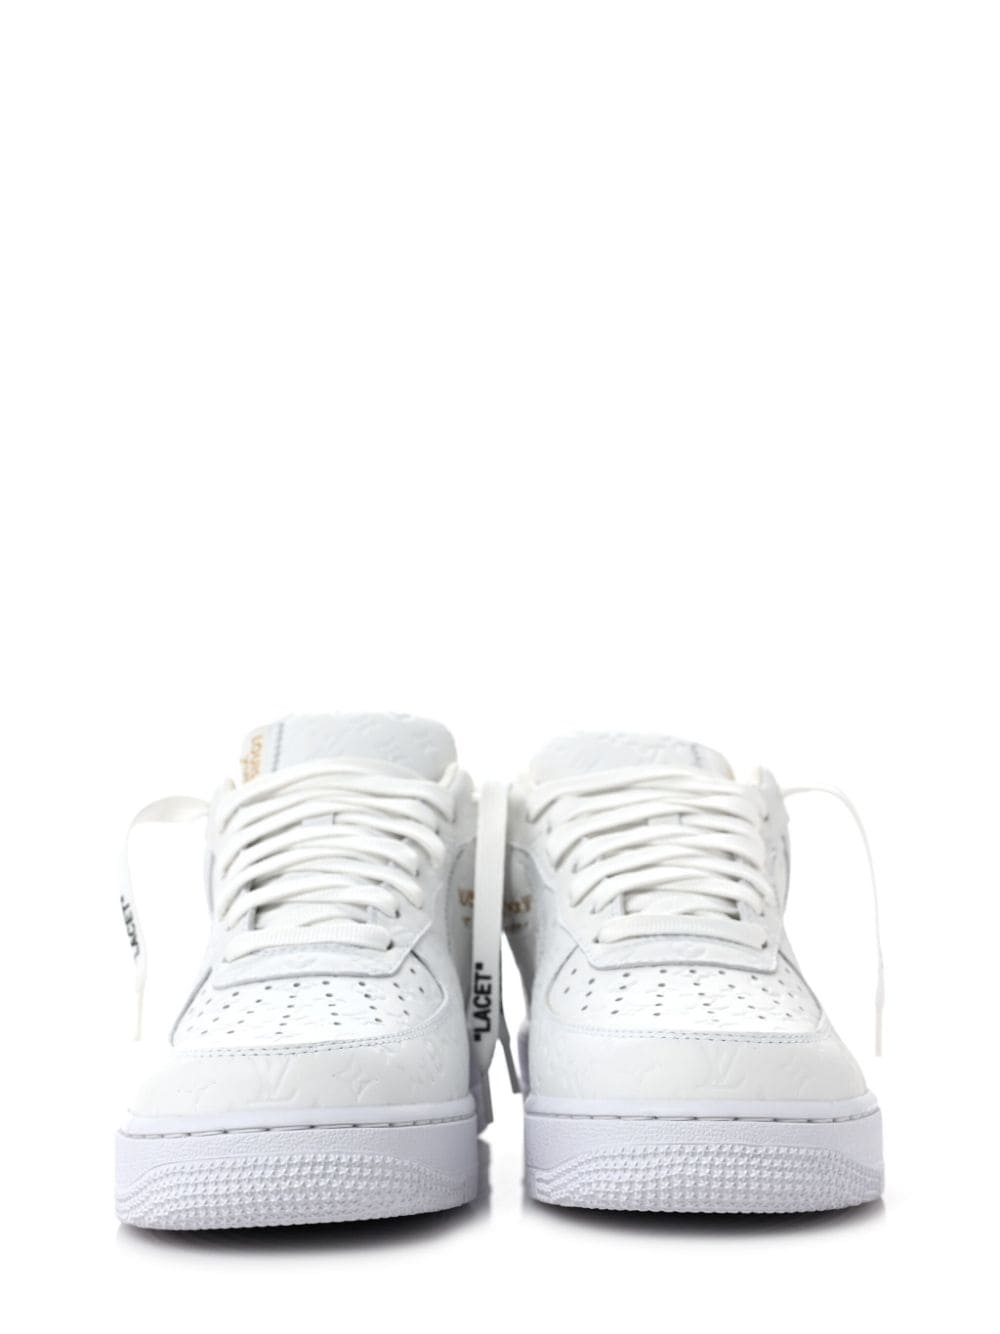 Pre-owned Louis Vuitton X Nike Air Force 1 Sneakers In White